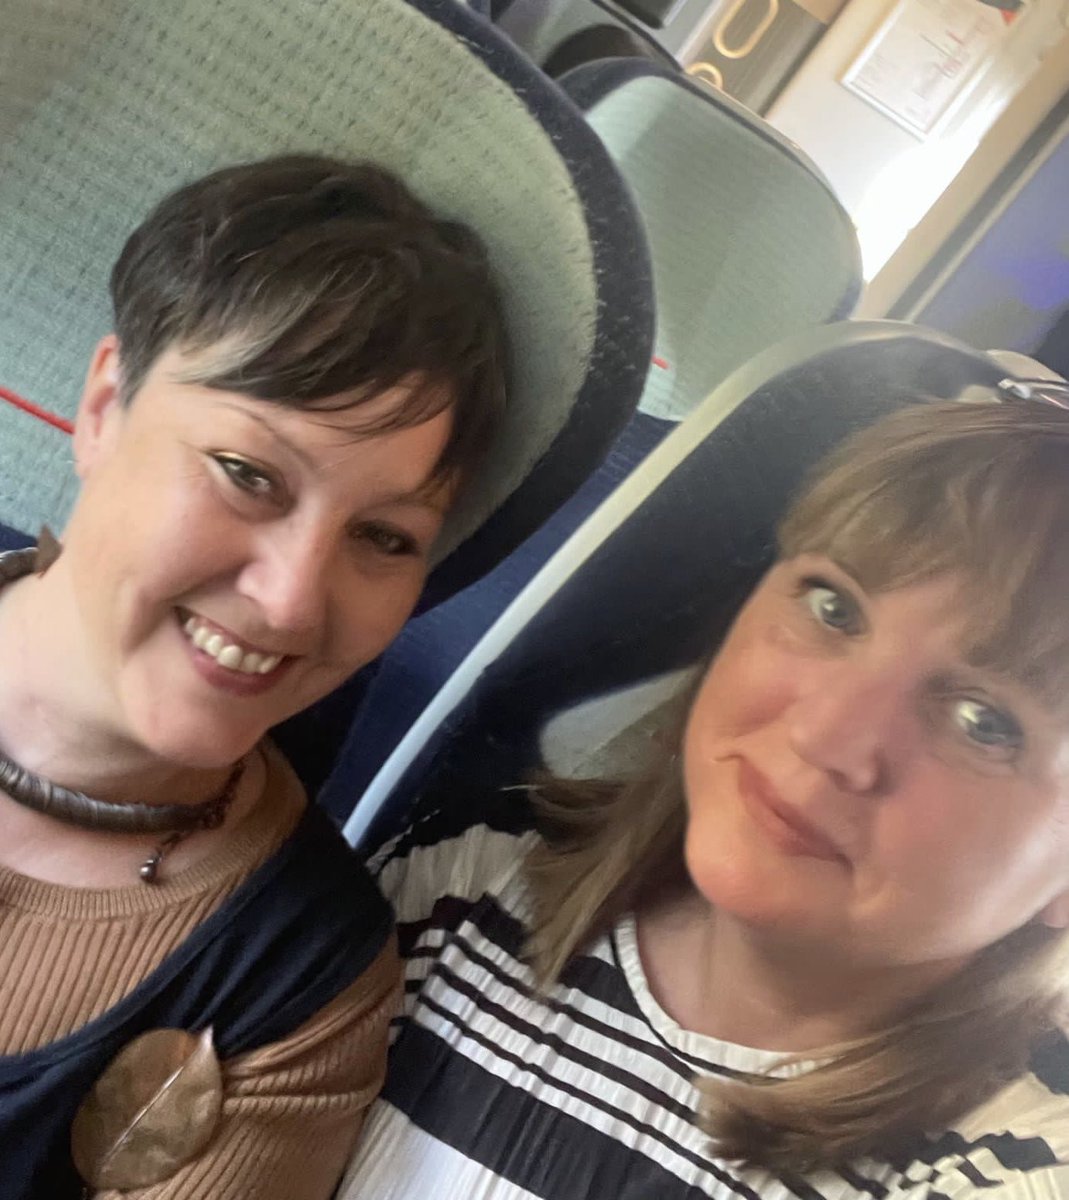 Off to London for The Oliver McGowan Mandatory training celebration event. The online training is now live please complete. Tier 1 and Tier 2 coming soon. #oliverscampaign #teamCWPT @sonya_gardiner @MelCoombesCEO @Allelesbelges @MaryMumvuri @CWPT_TracyMay